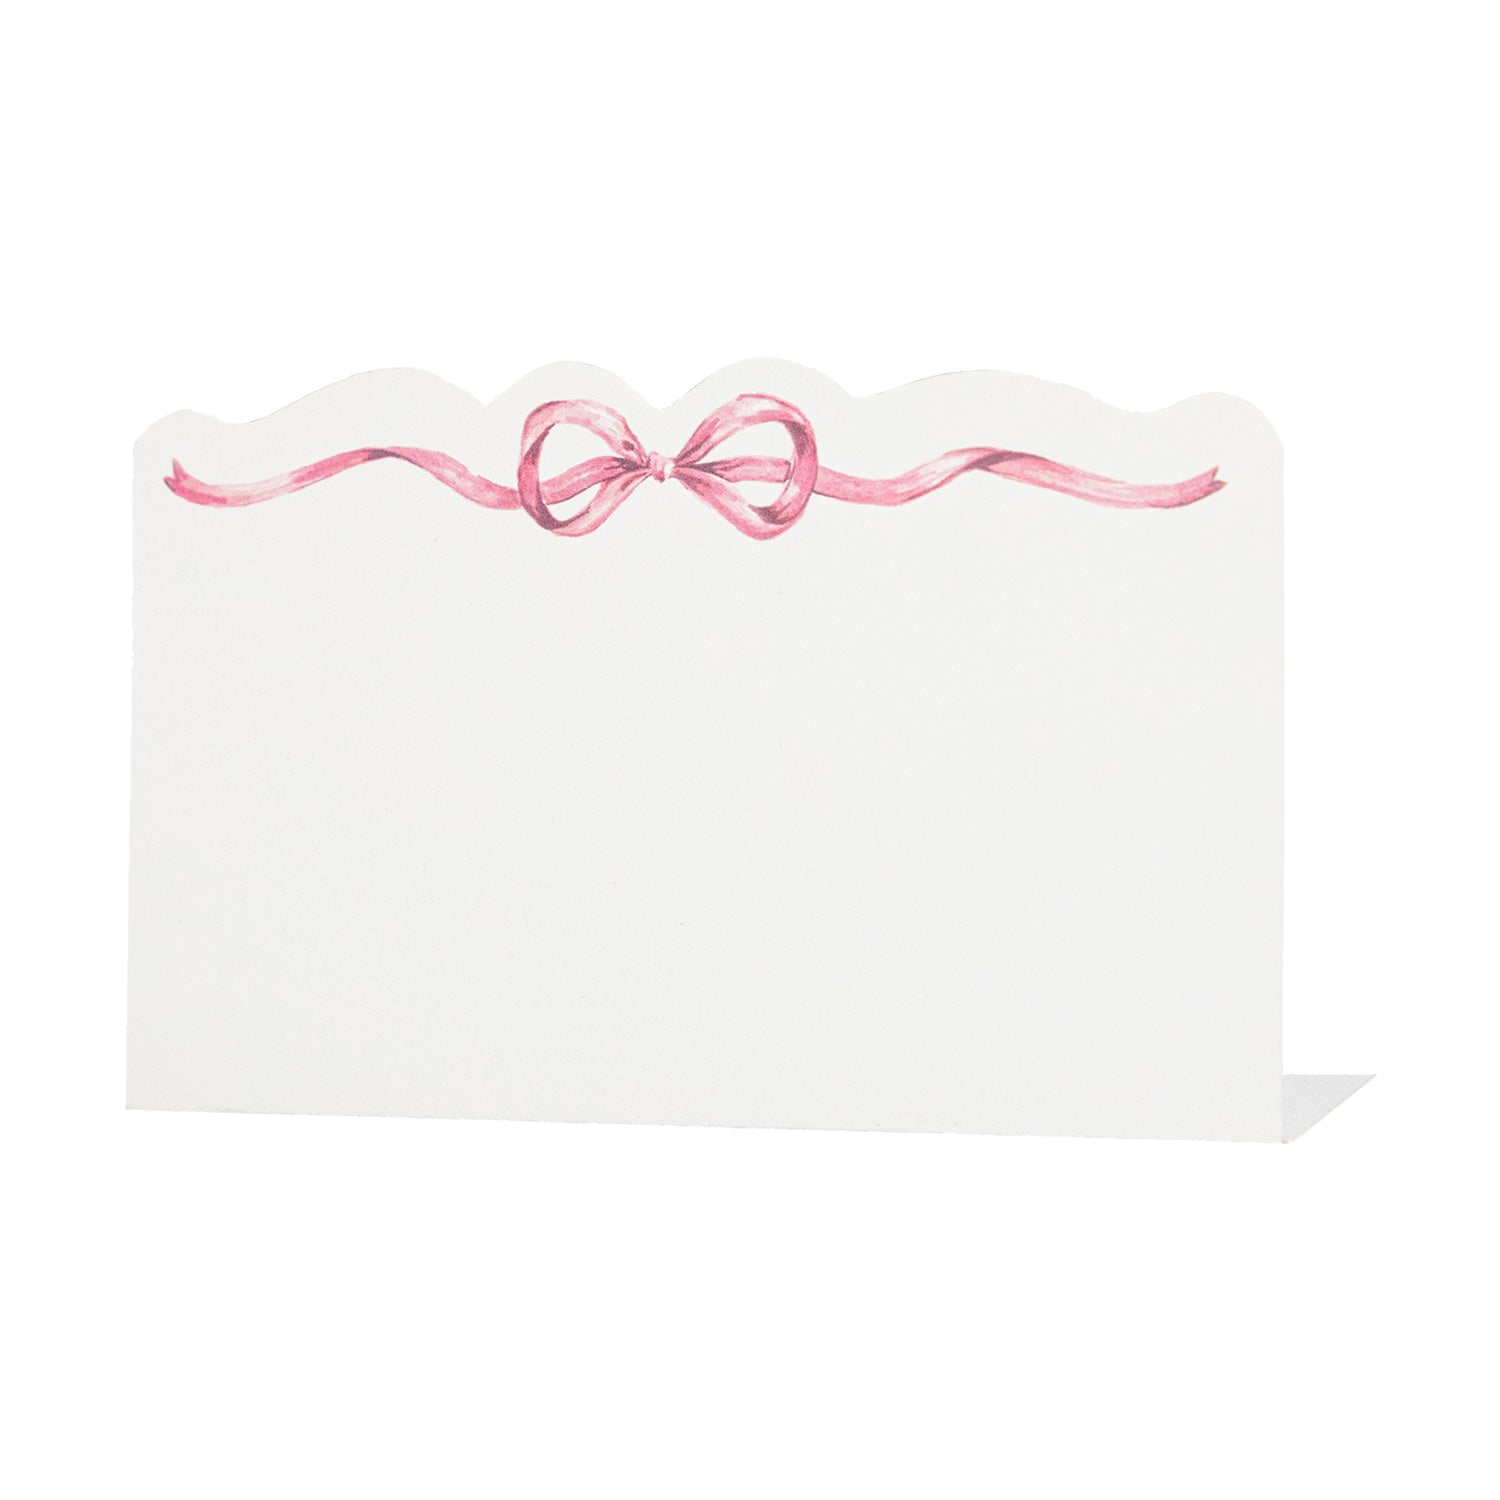 A Pink Bow Place Card by Hester &amp; Cook, perfect for adding a touch of loveliness to tables and buffets.